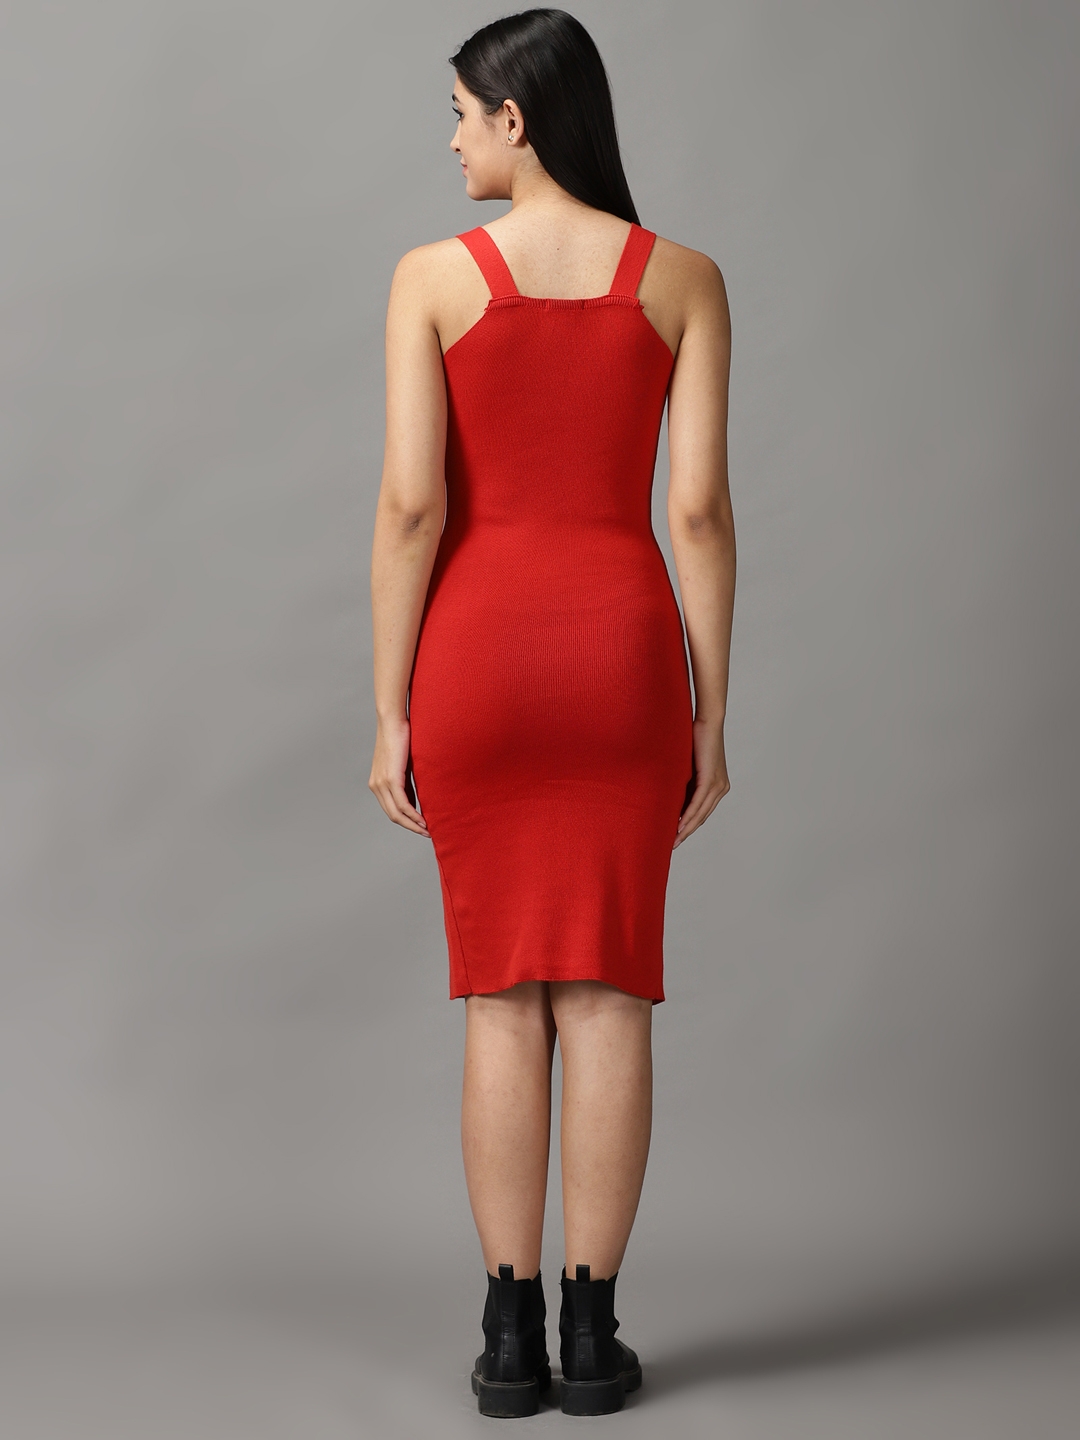 Women's Red Acrylic Solid Dresses